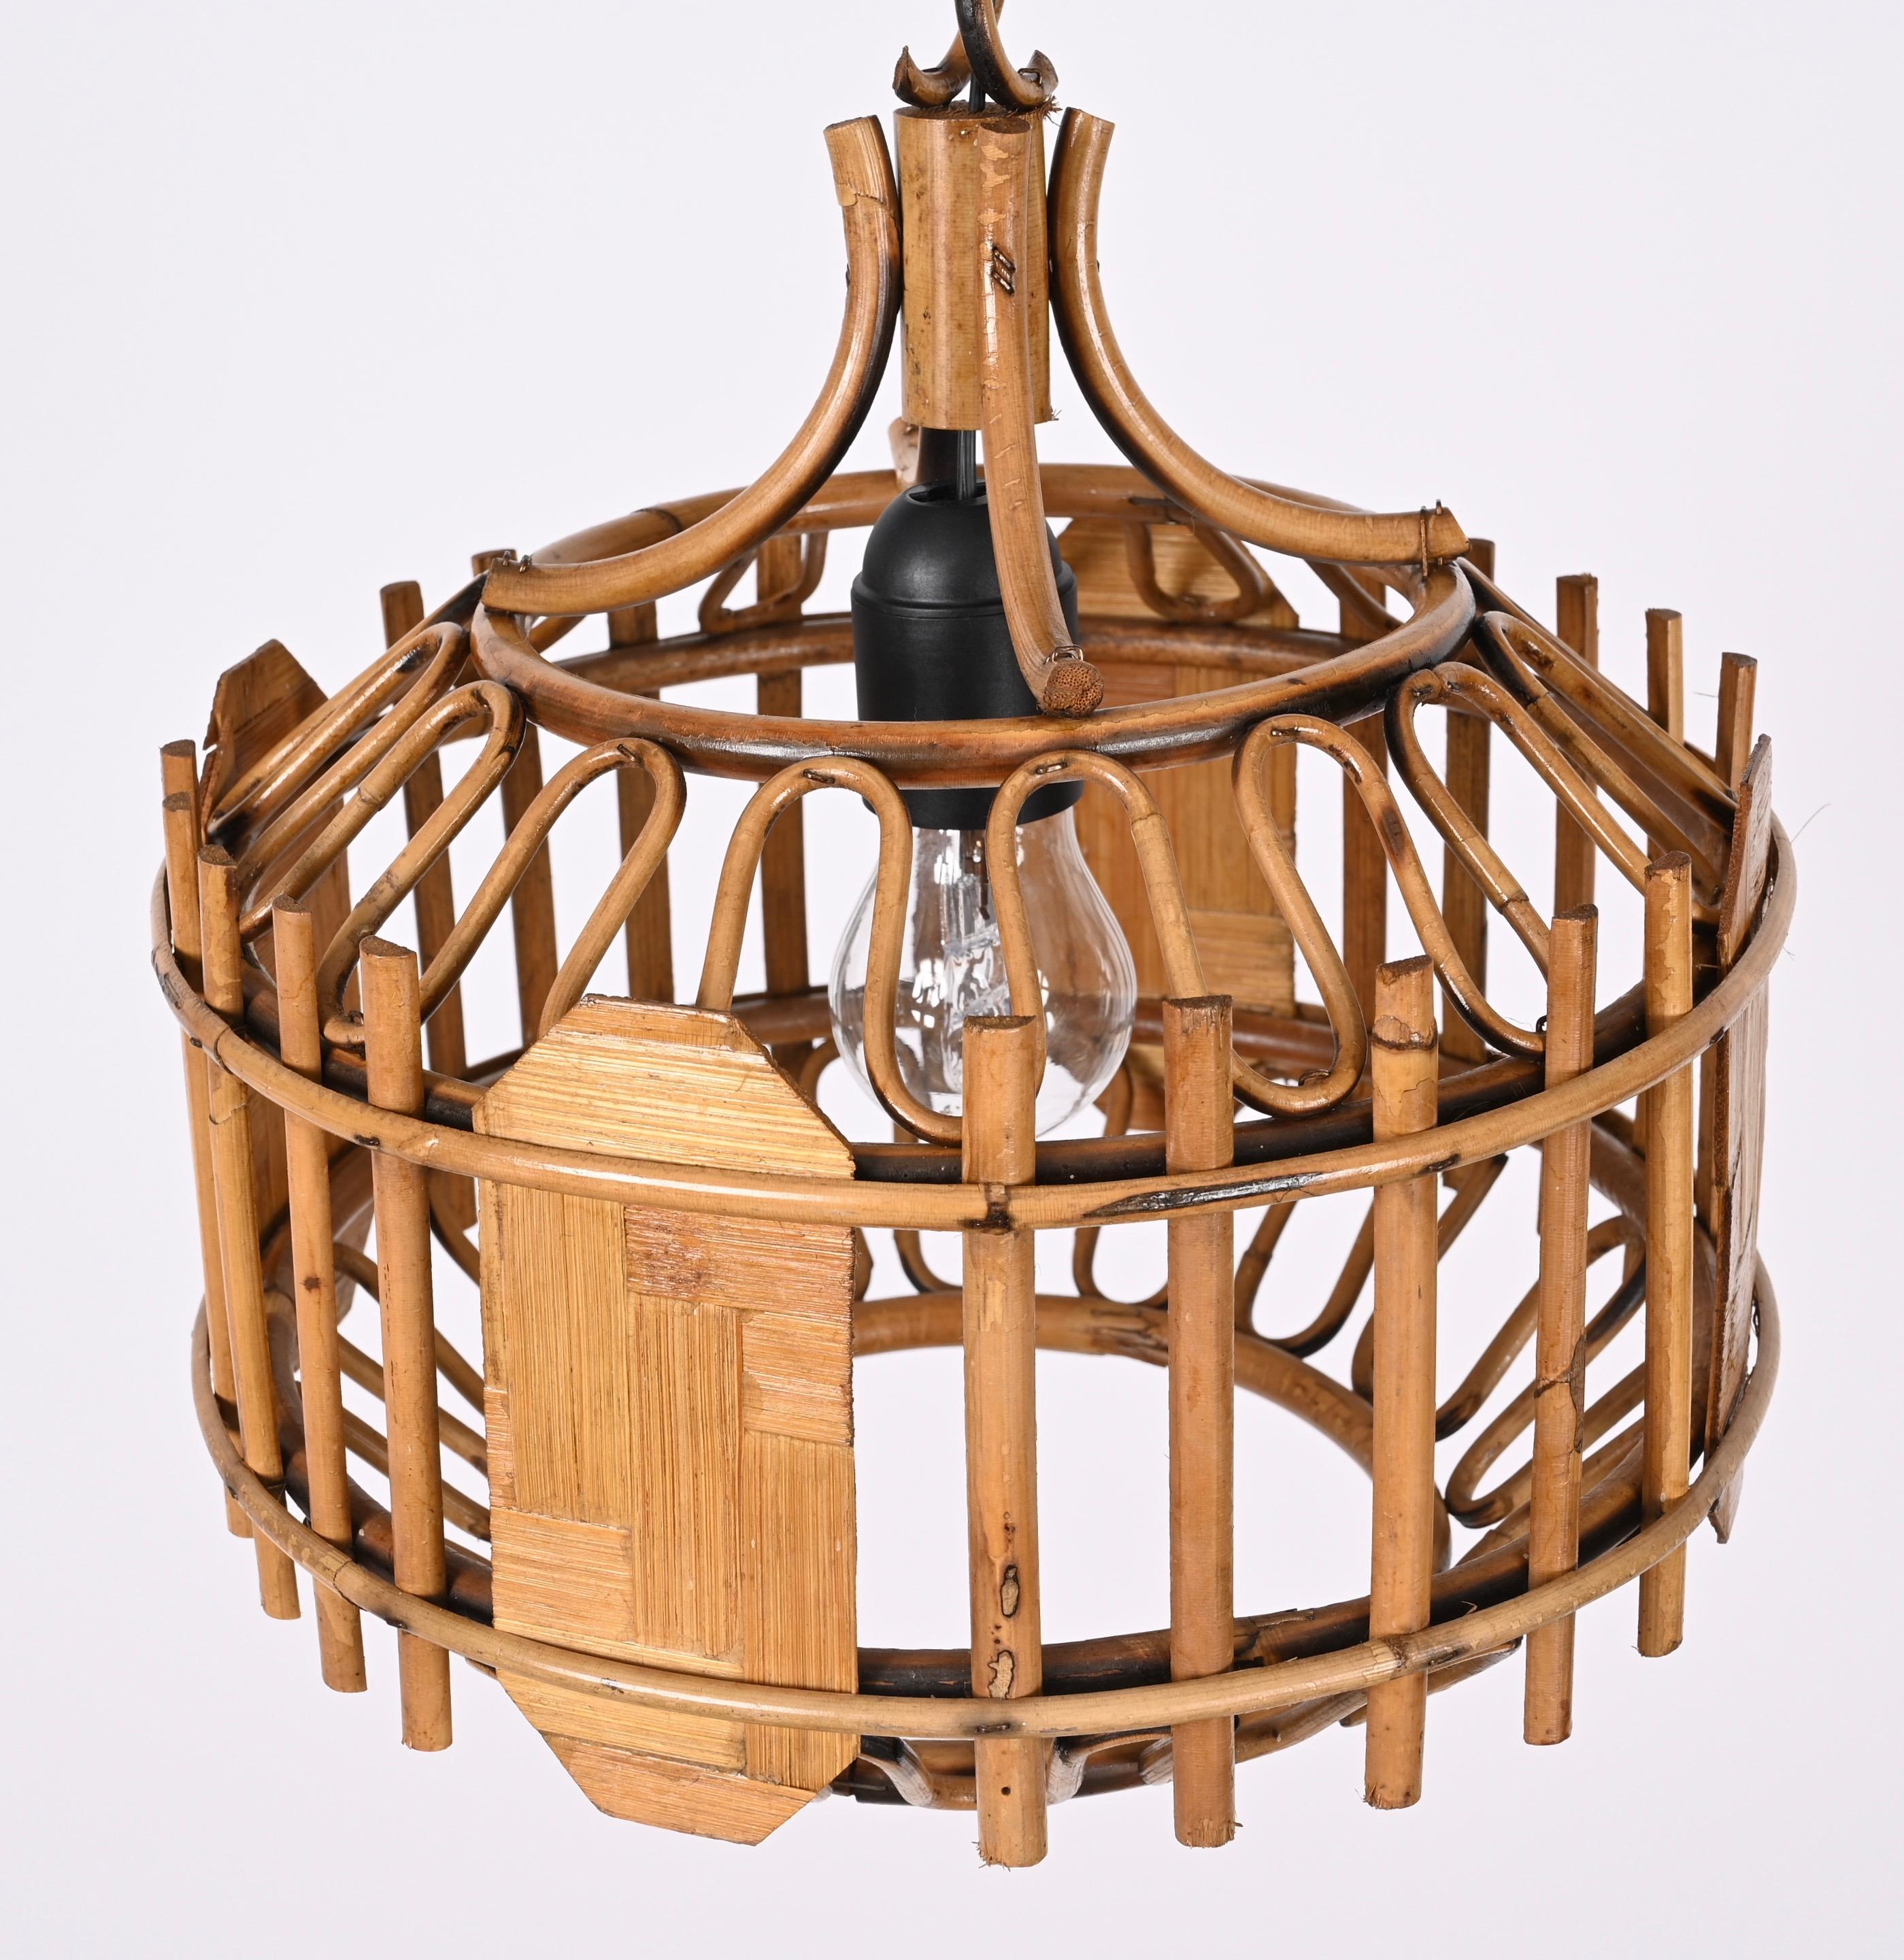 Stunning mid-century style round hanging chandelier in bamboo, Rattan and Cote d'Azur. This wonderful object was produced in Italy in the 1960s.

This amazing design is perfect for anyone who loves using rattan to create beautiful